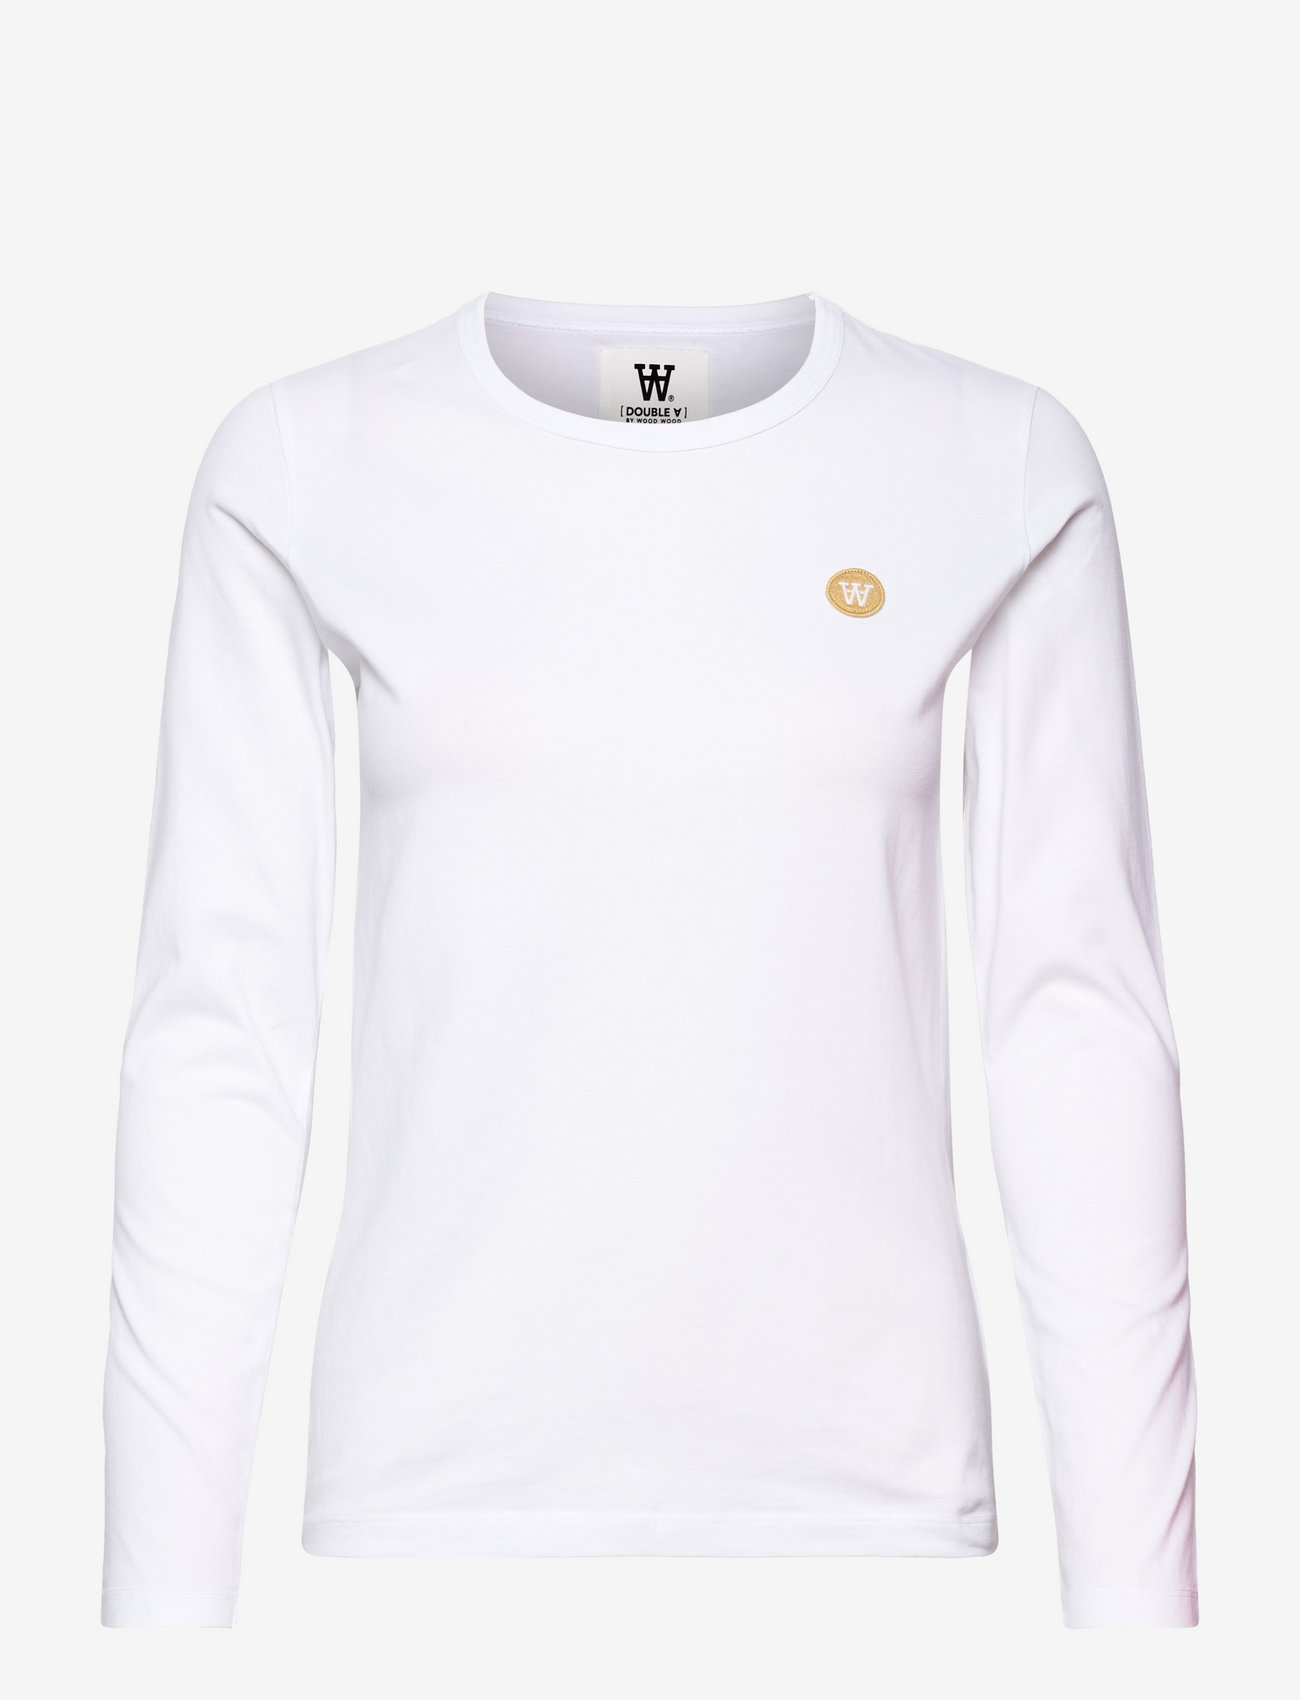 Double A by Wood Wood - Moa long sleeve - t-shirts & tops - white - 0